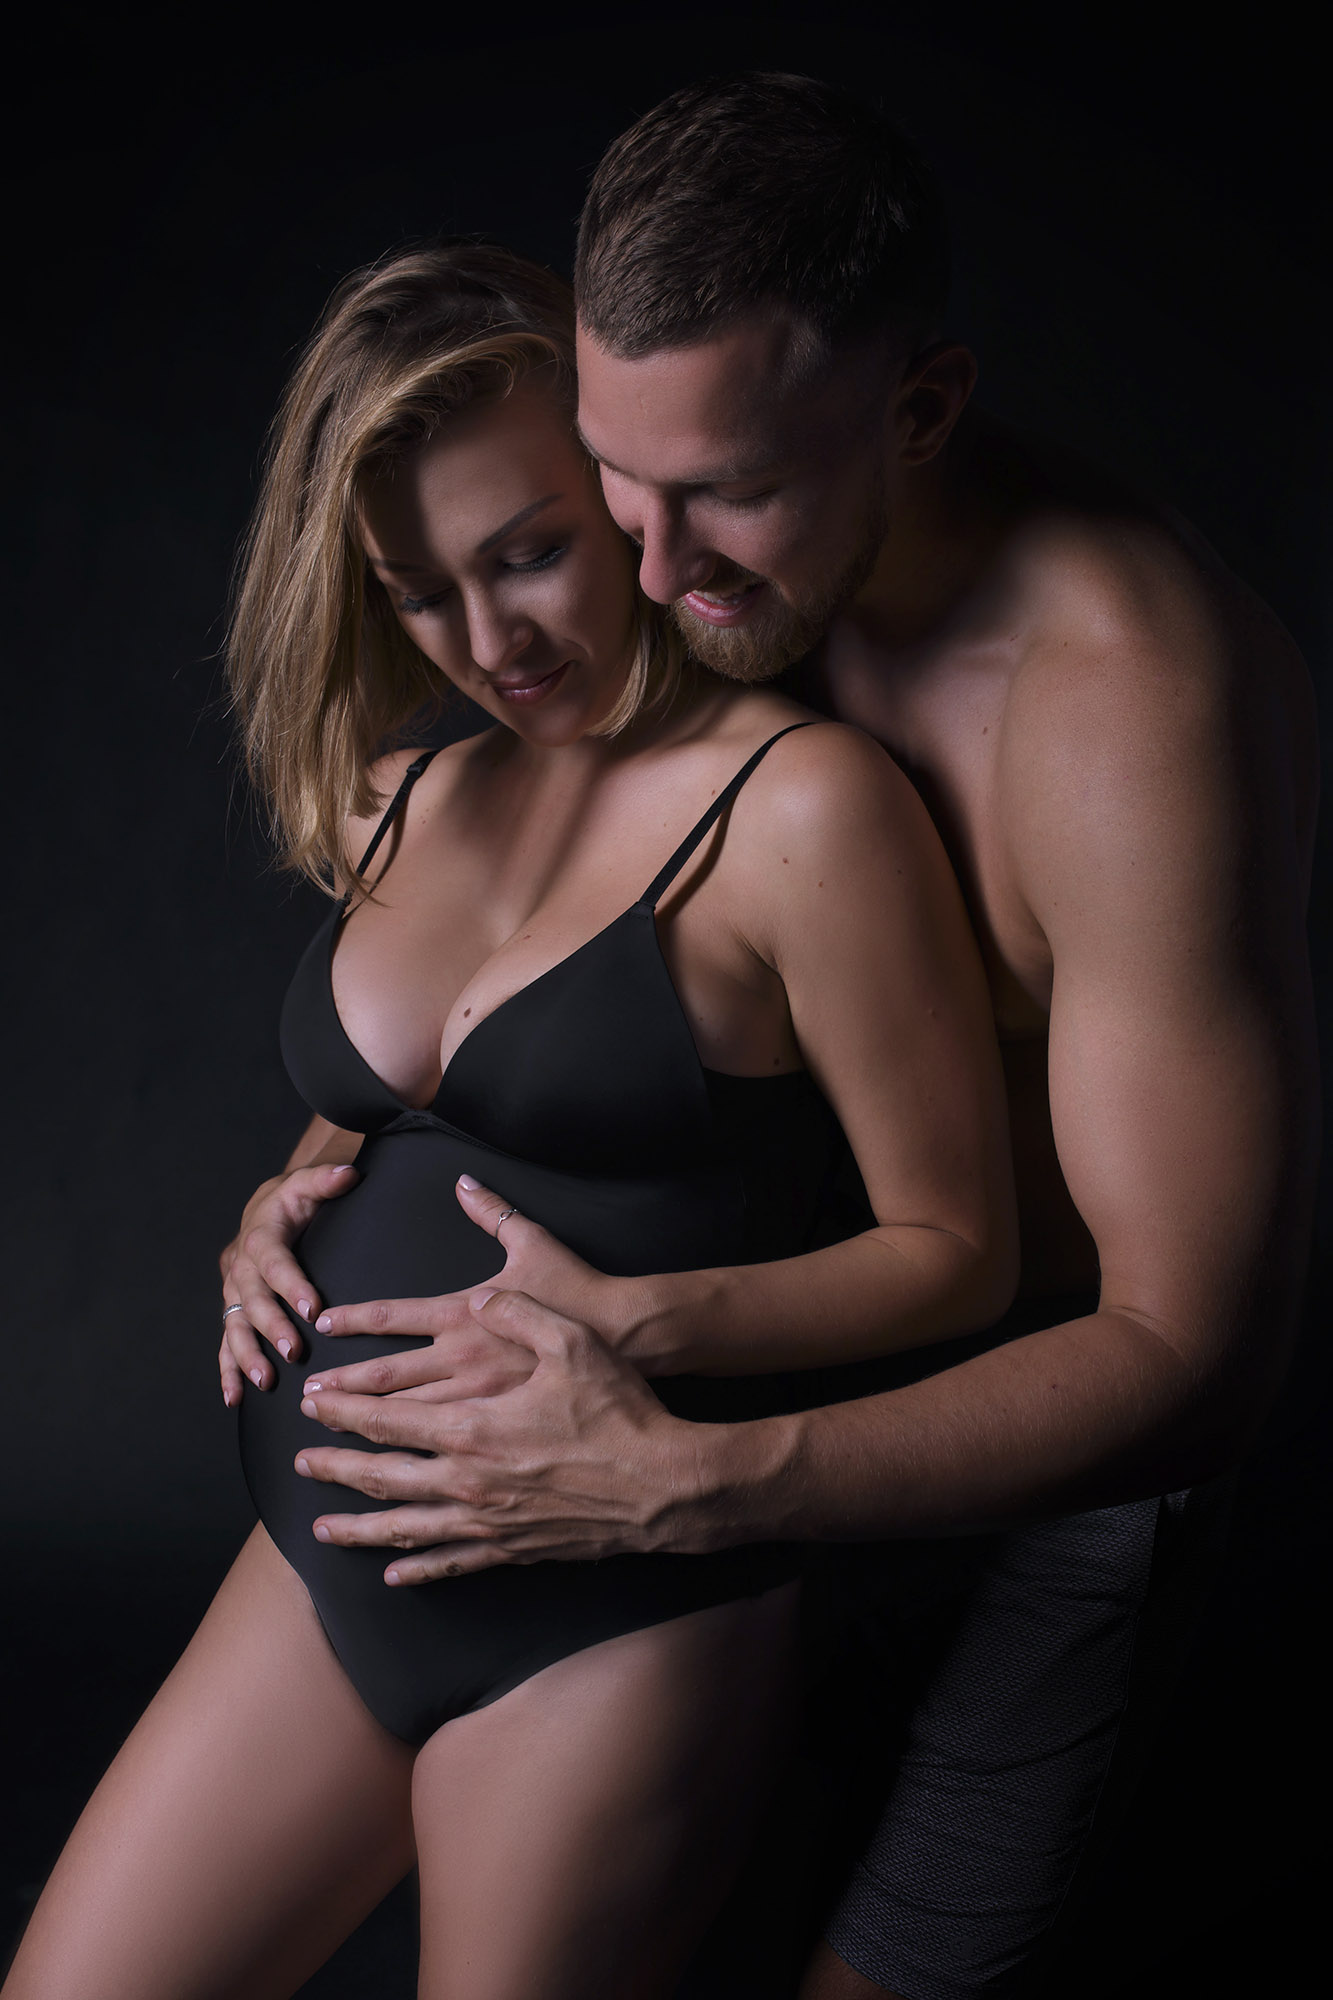 Man is hugging a pregnant woman in black lanerie